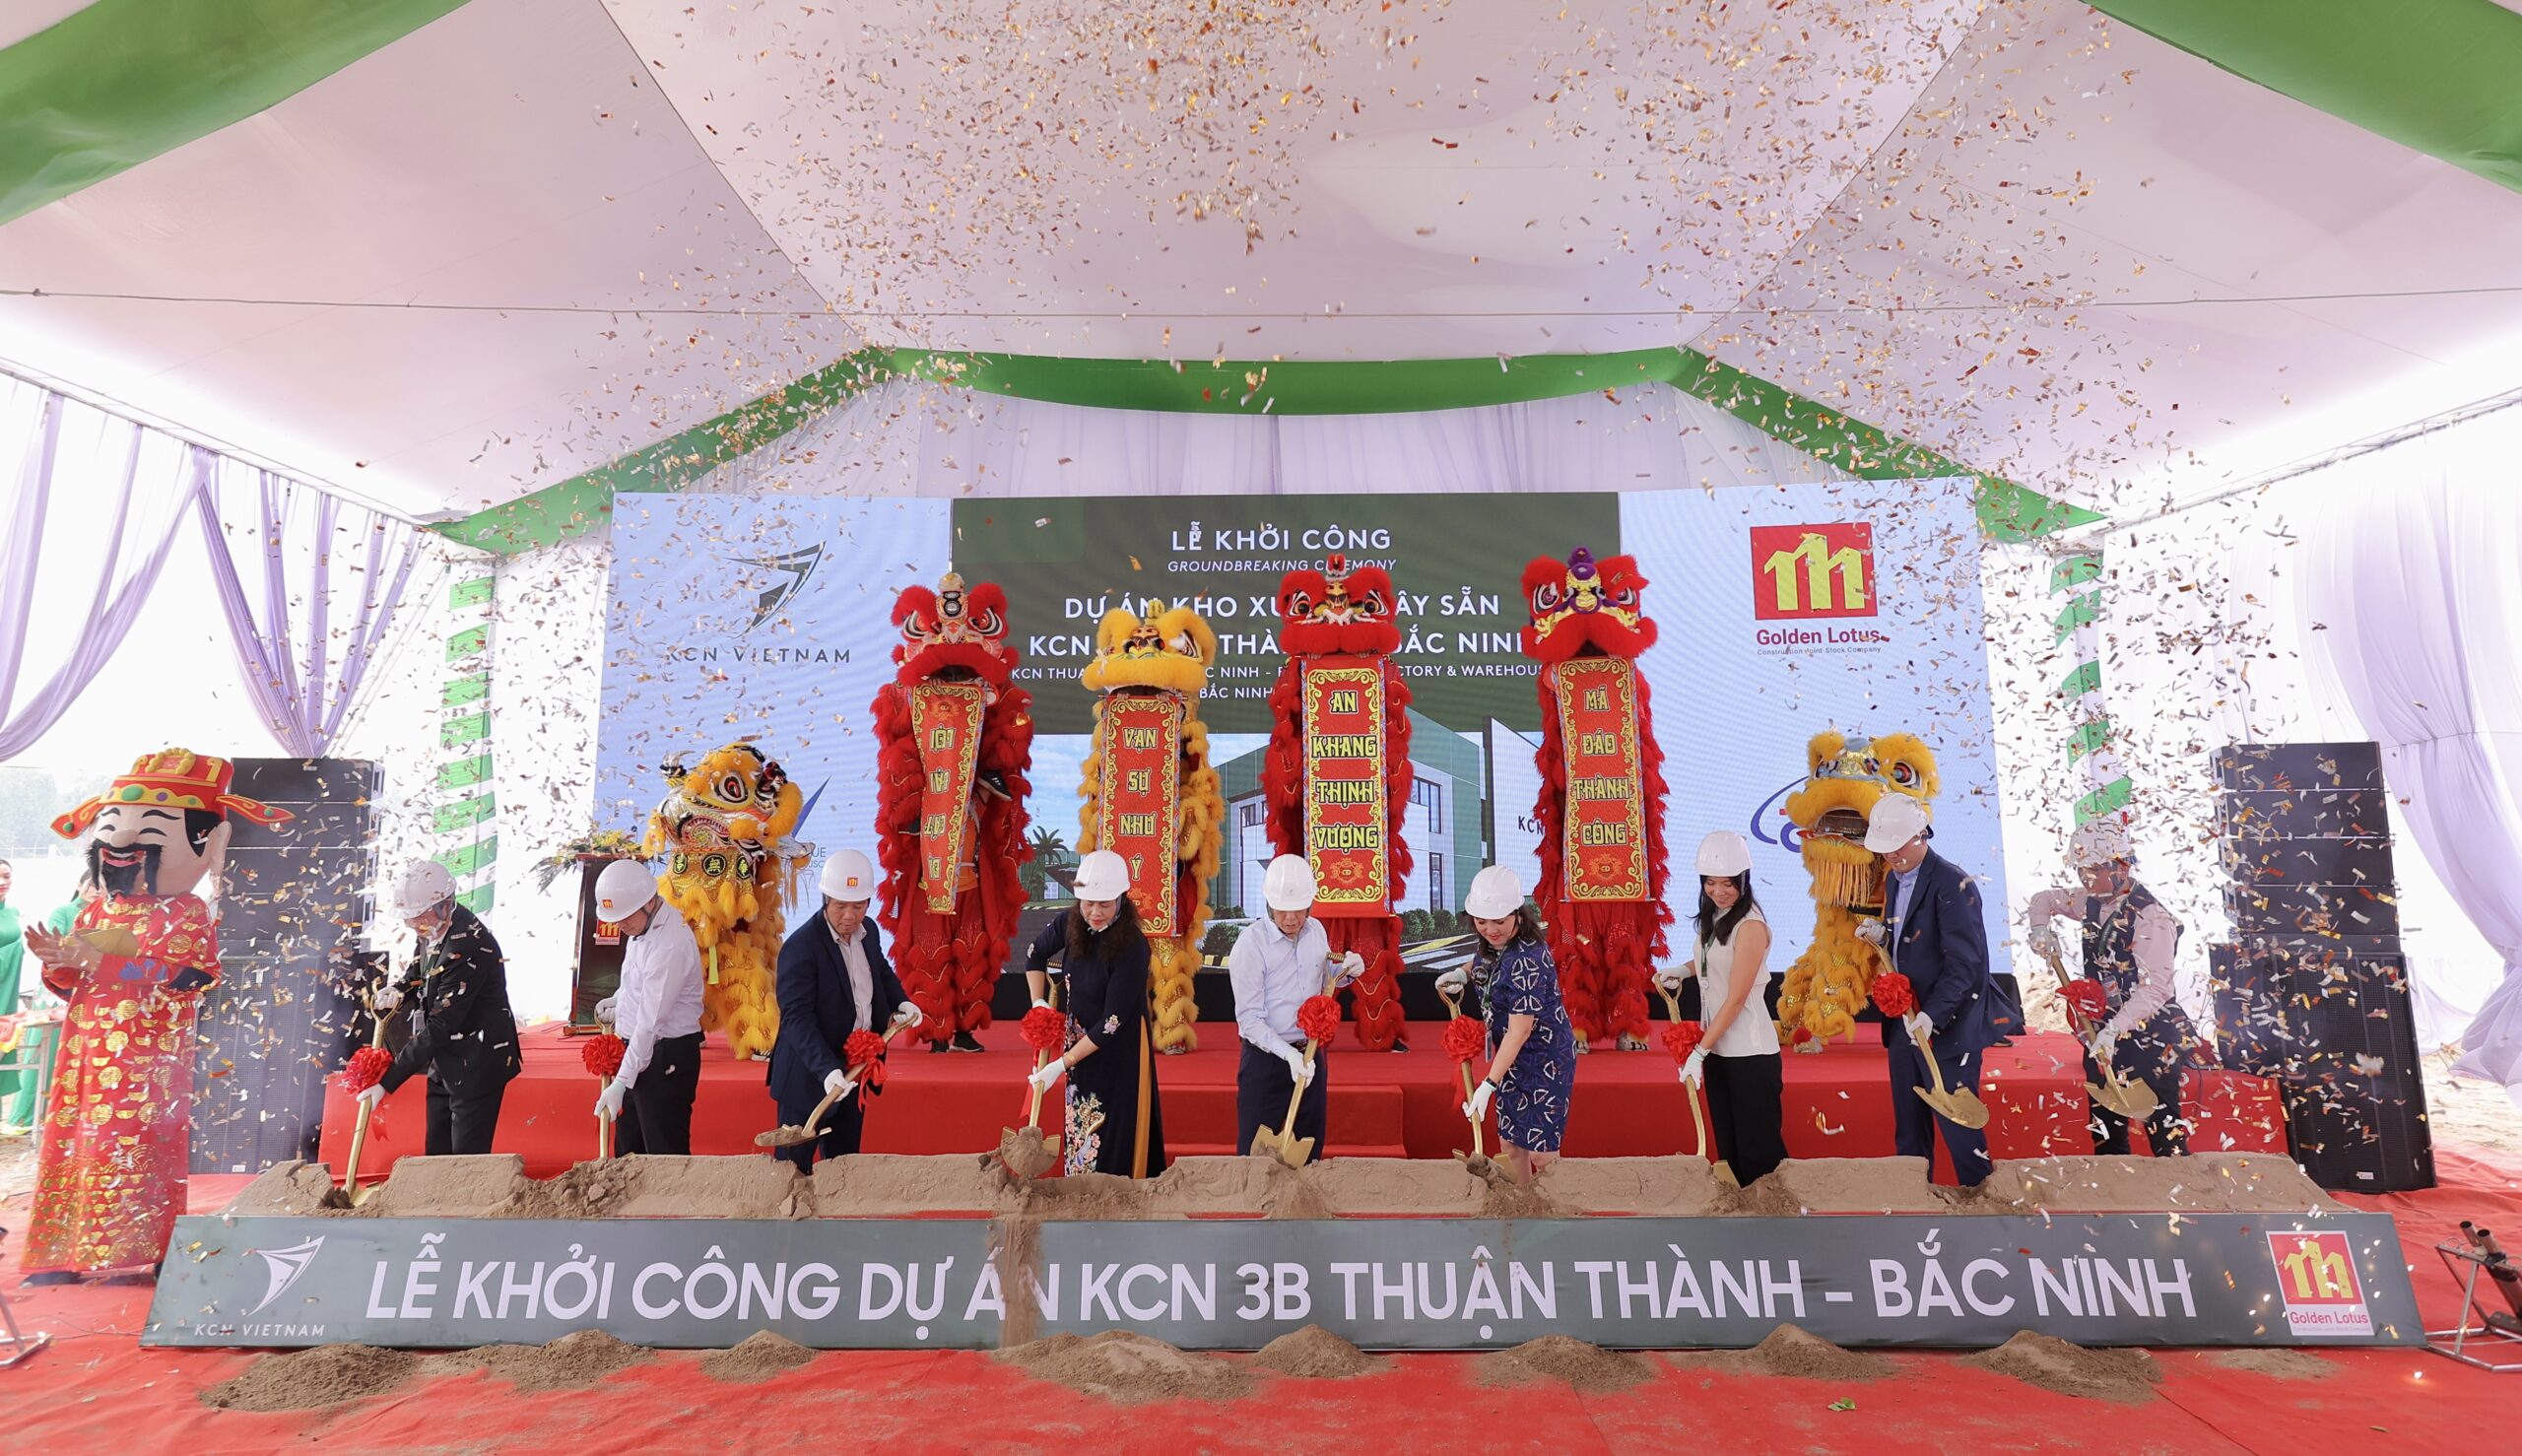 KCN VIETNAM BREAKS GROUND ON KCN THUAN THANH 3B – BAC NINH FOR READY-BUILT FACTORY AND WAREHOUSE PROJECT